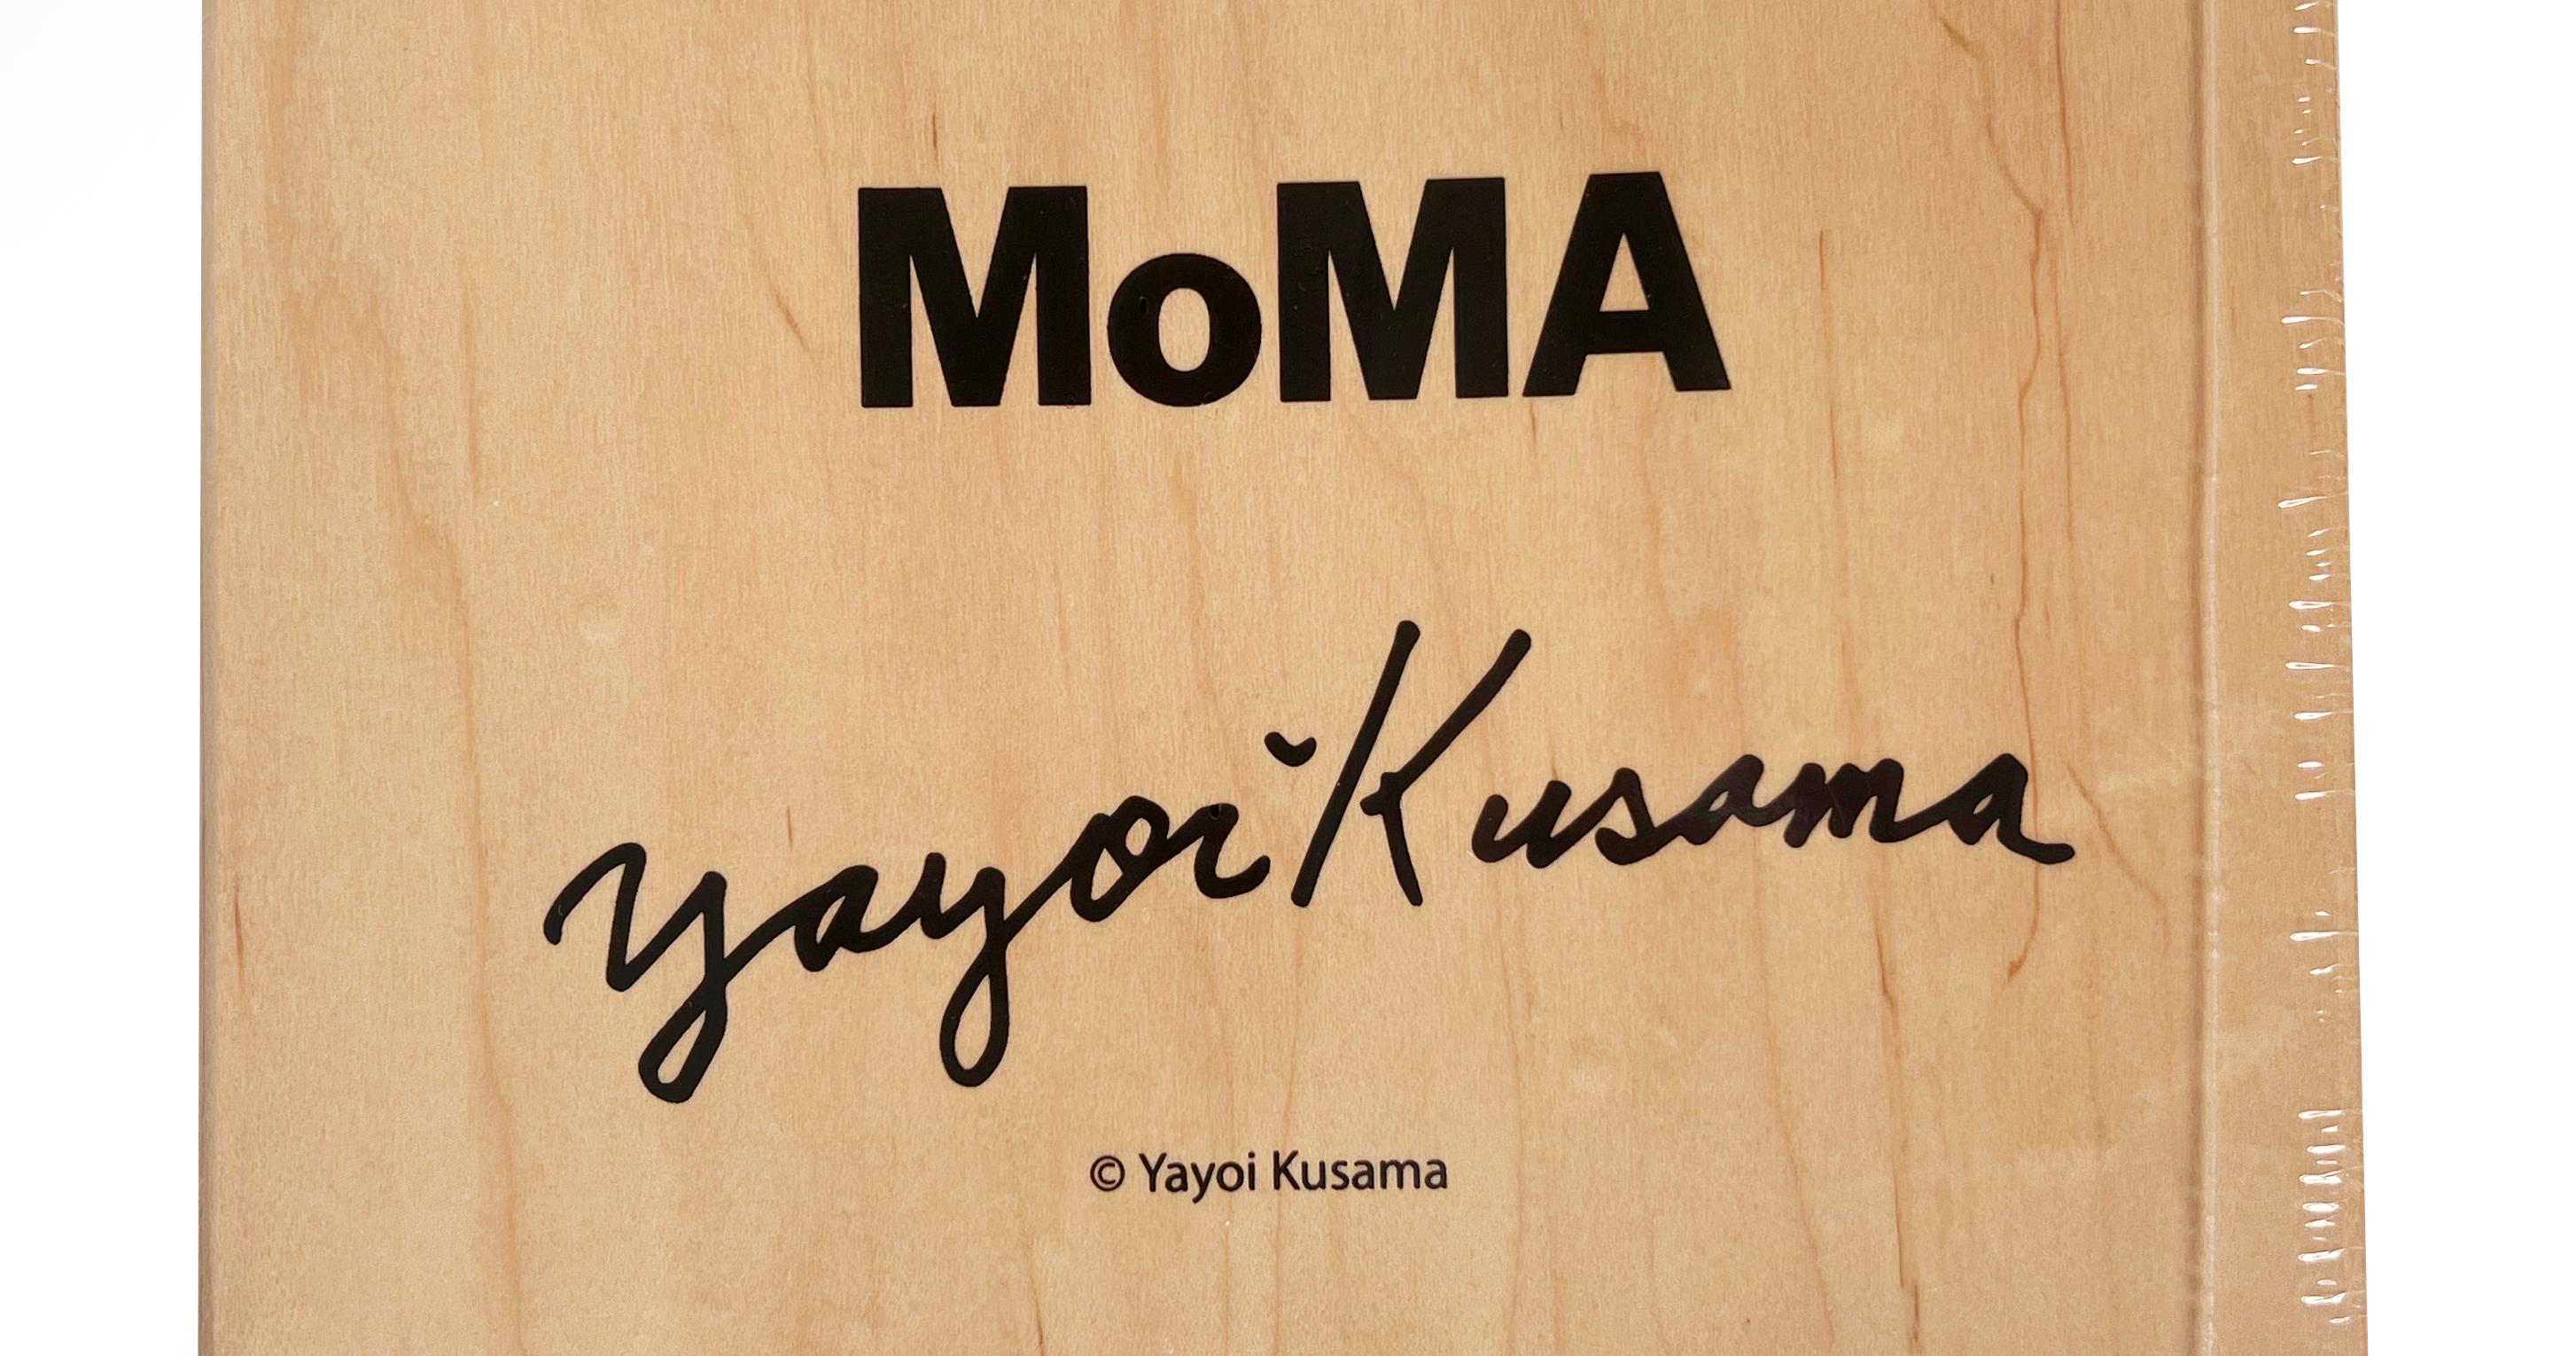 Yayoi Kusama MoMa Skateboard Deck:
This Kusama skateboard deck features Kusama's Dots Obsession imagery and makes for standout Kusama wall art that hangs with ease. Published by MoMa New York. The work is completely sold out/out of print.

Medium: